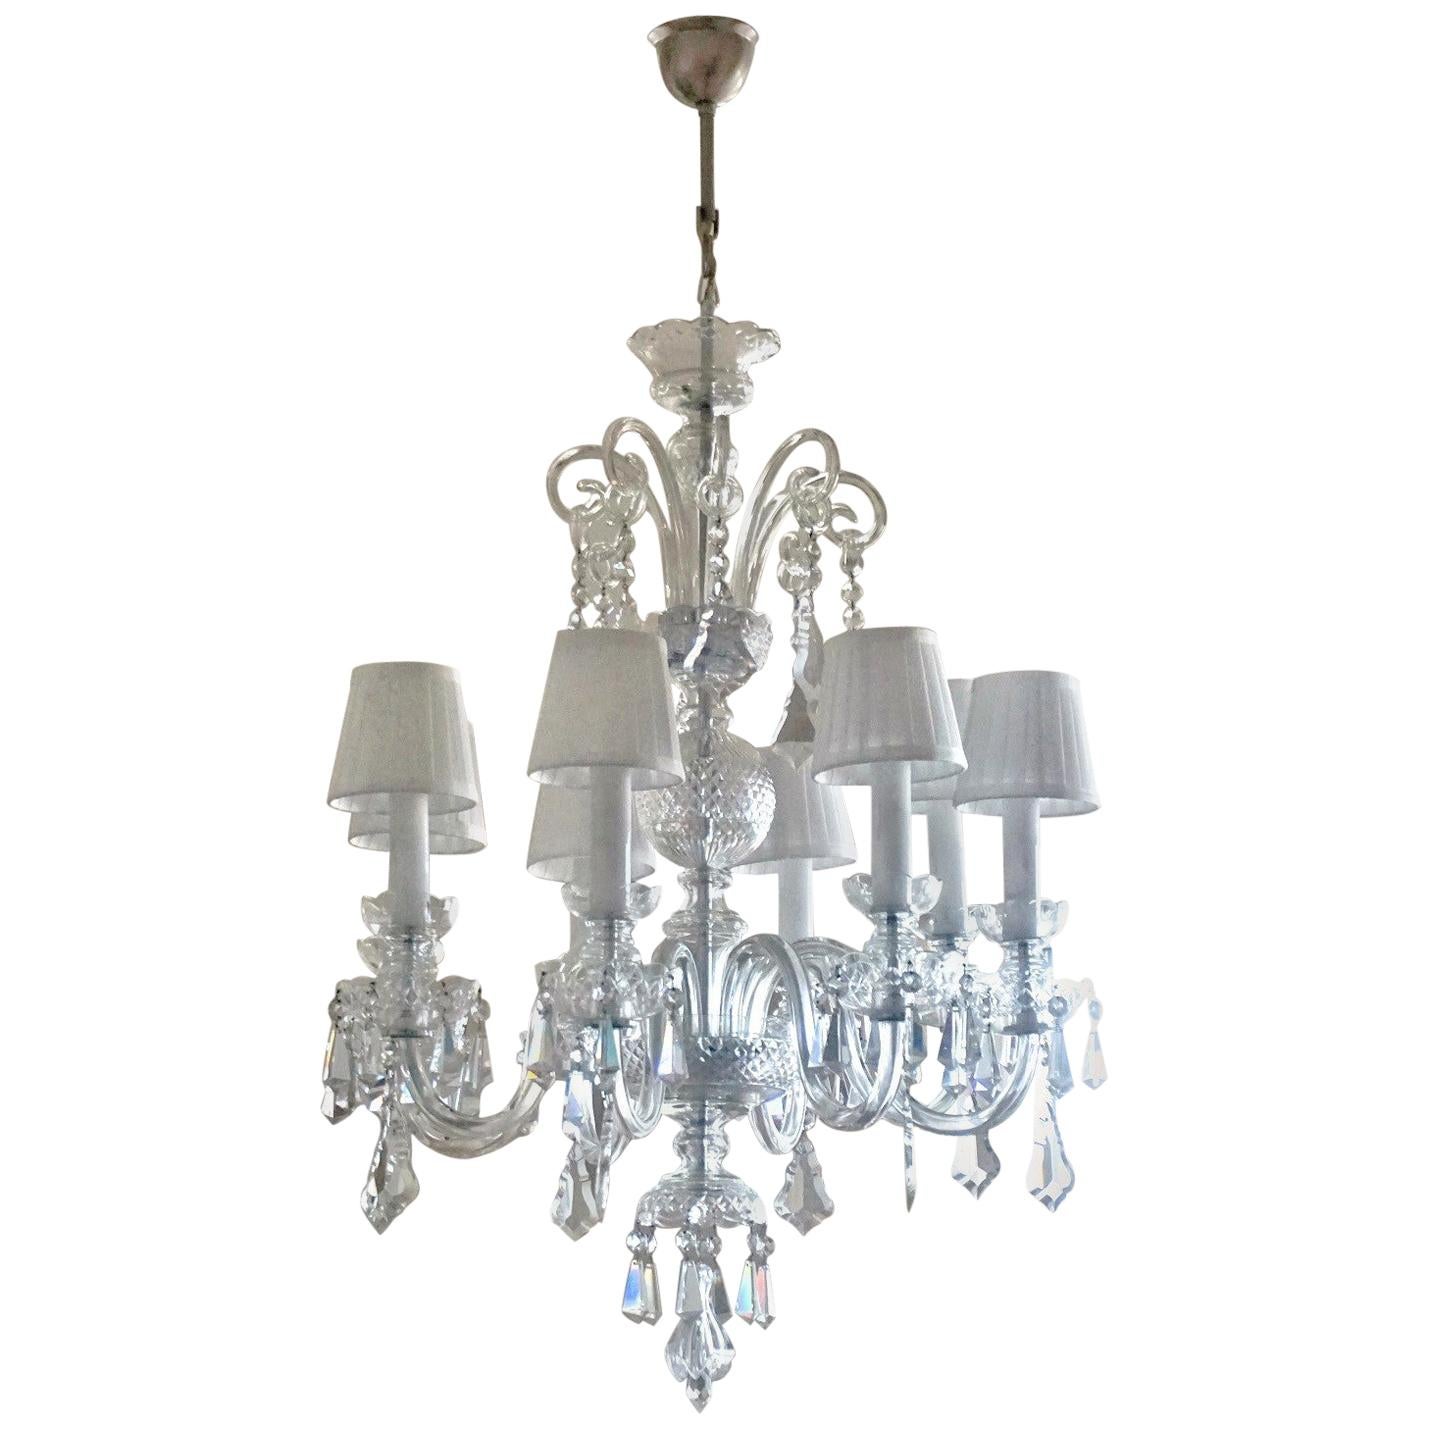 Art Deco Large Murano Glass Crystal Chandelier, Italy, 1910-1920 For Sale